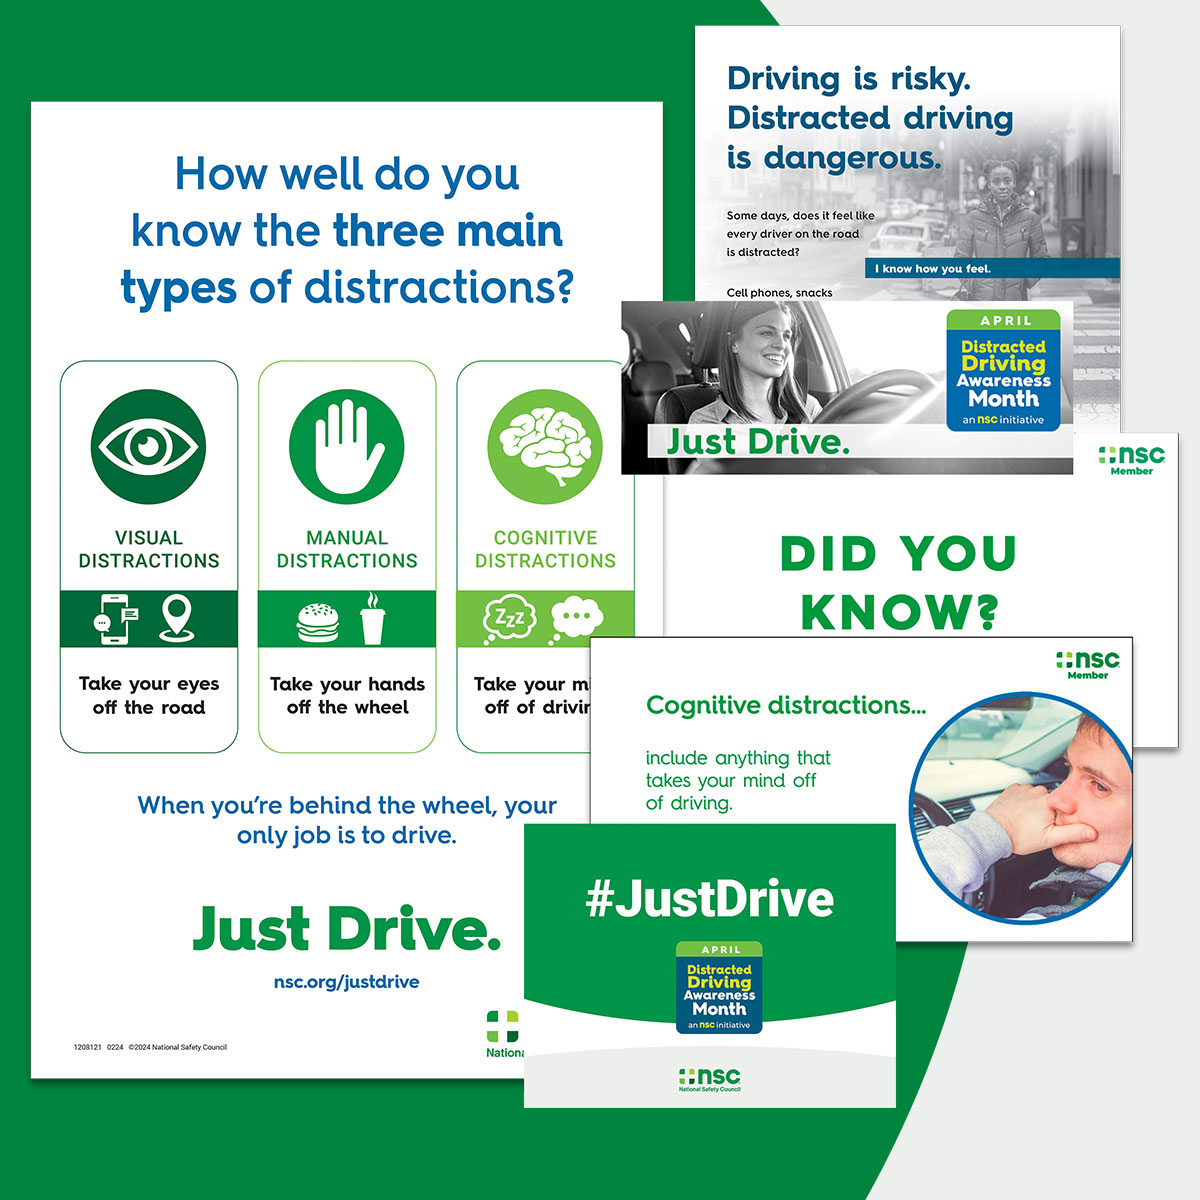 Distracted Driving Awareness Month begins today. Let’s work together to create safer roads because an average of 9 people a day are killed in #distracteddriving crashes. #DDAM